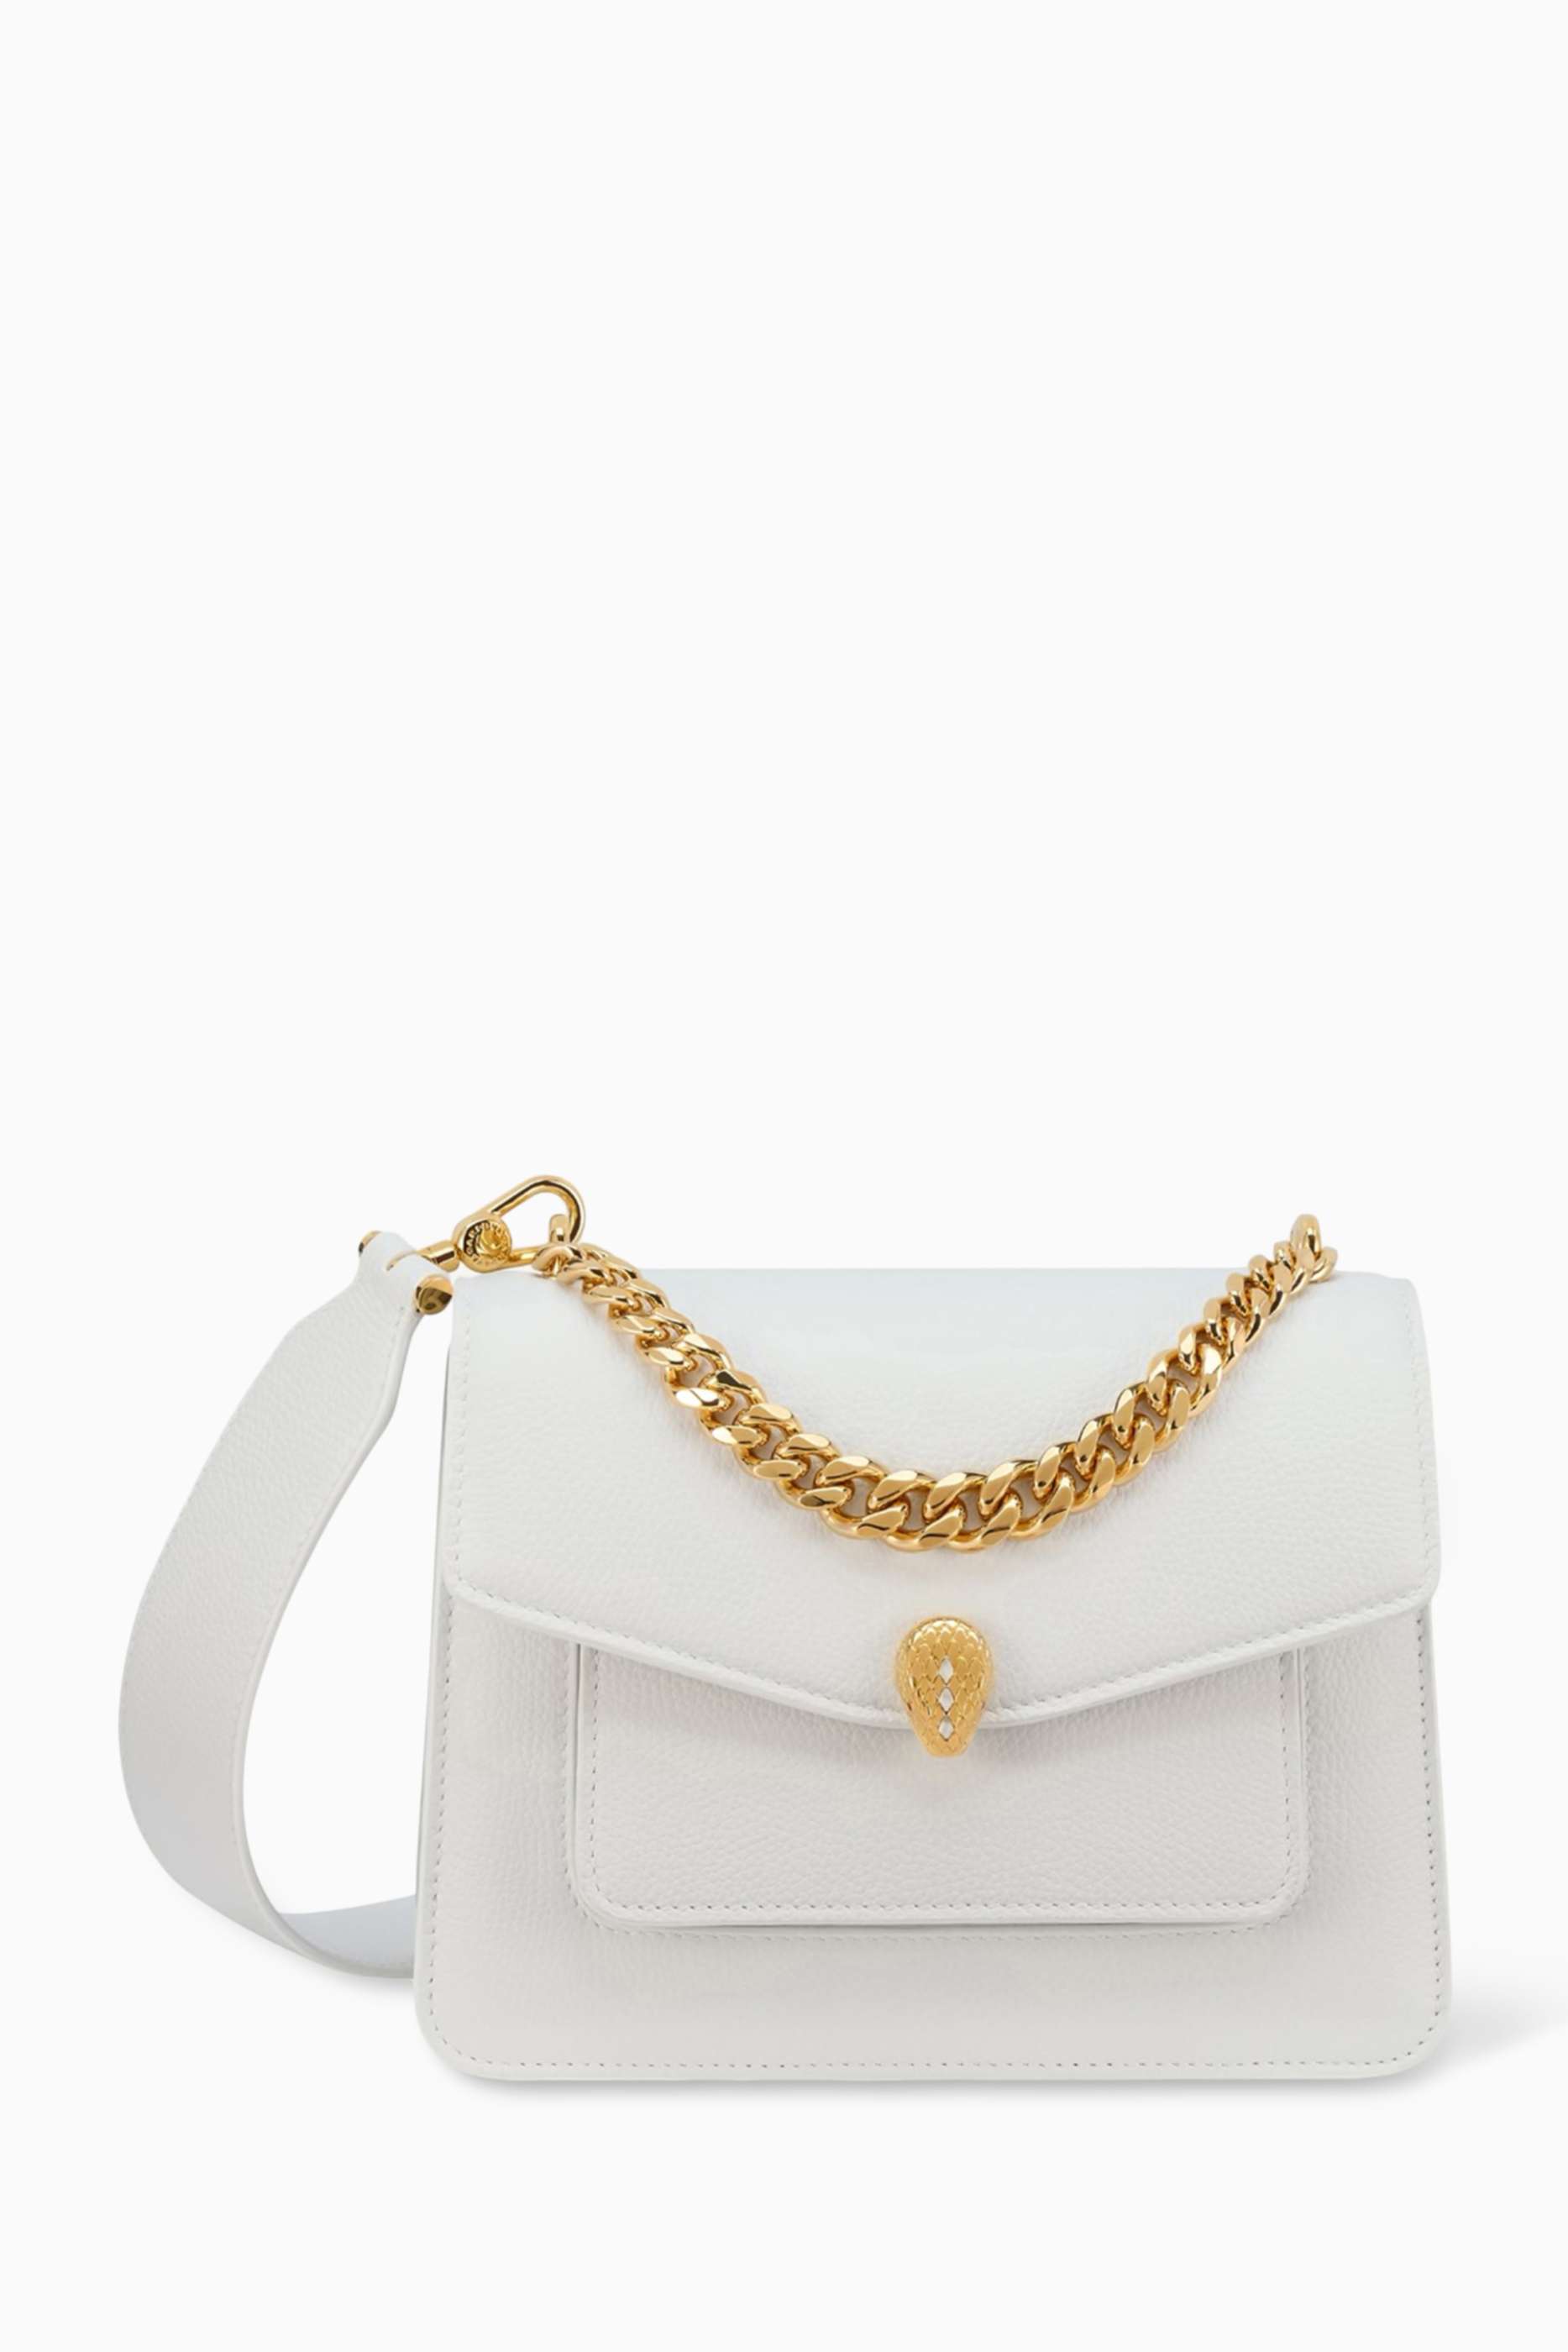 shop-bvlgari-small-serpenti-forever-maxi-chain-crossbody-bag-in-leather-for-women